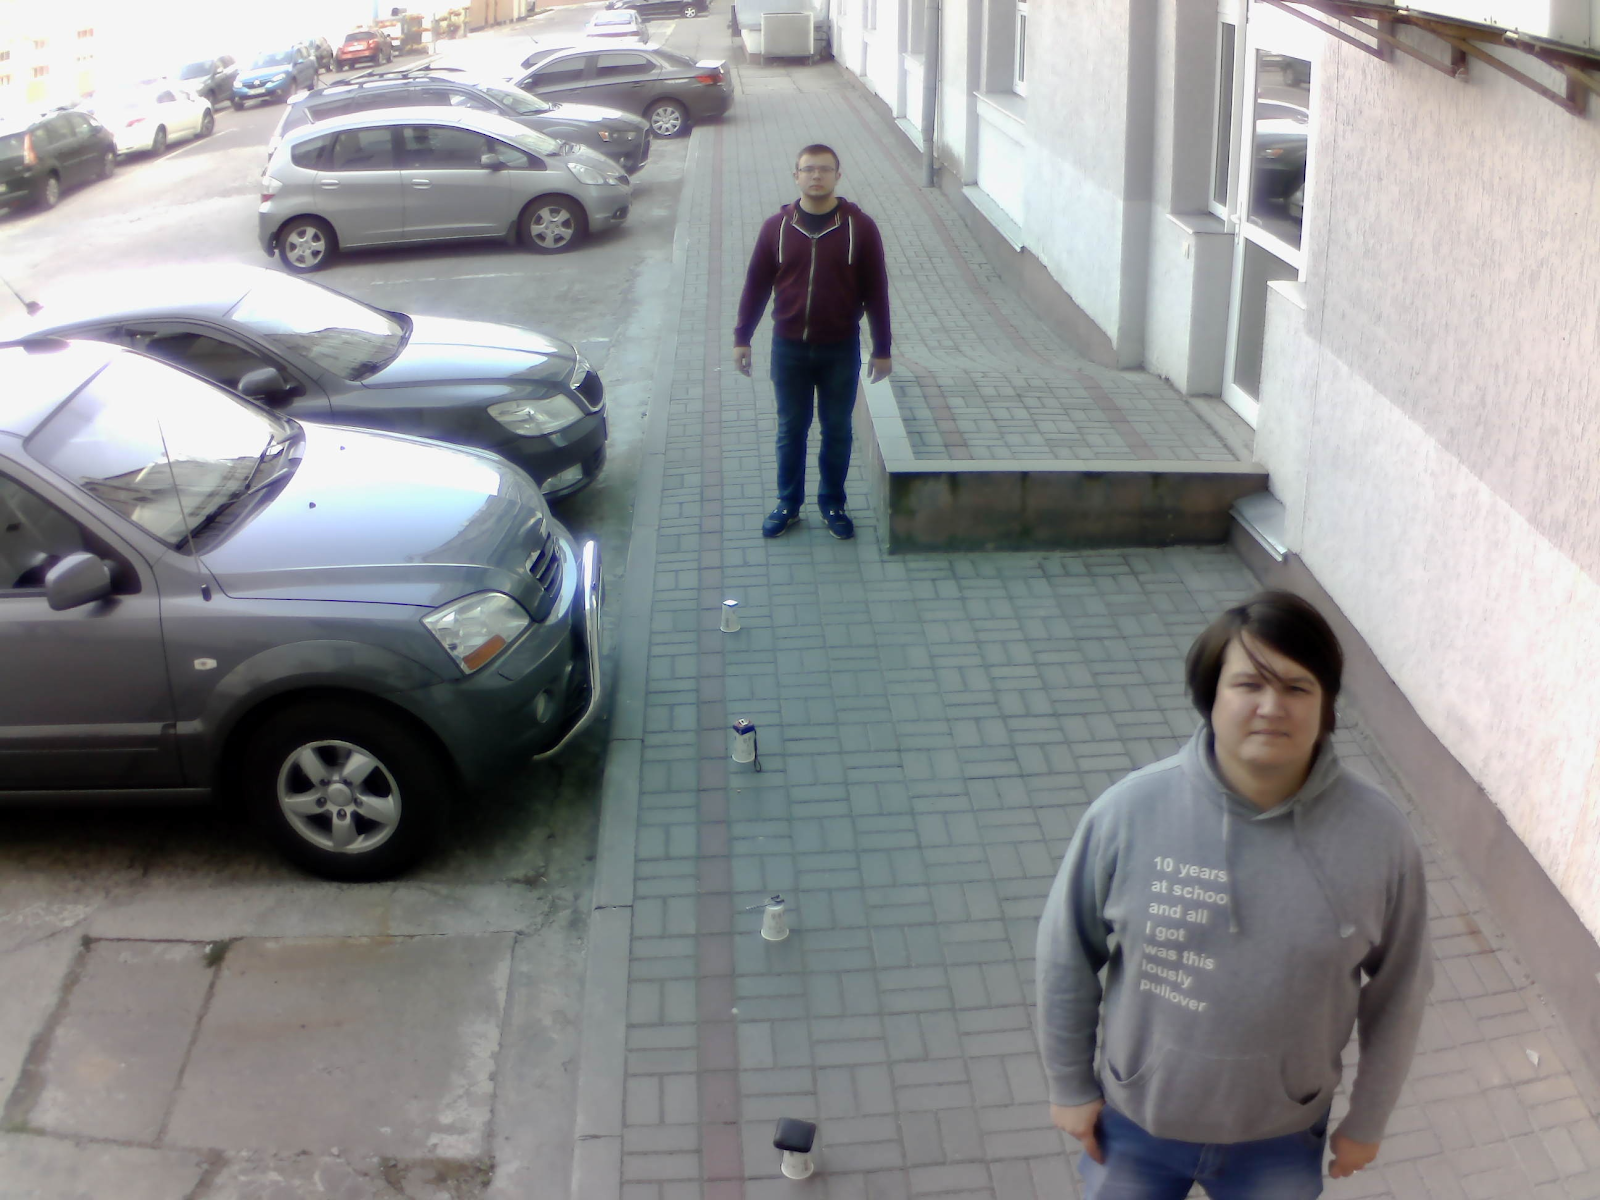 Face recognition - foot traffic analysis system development - camera tests